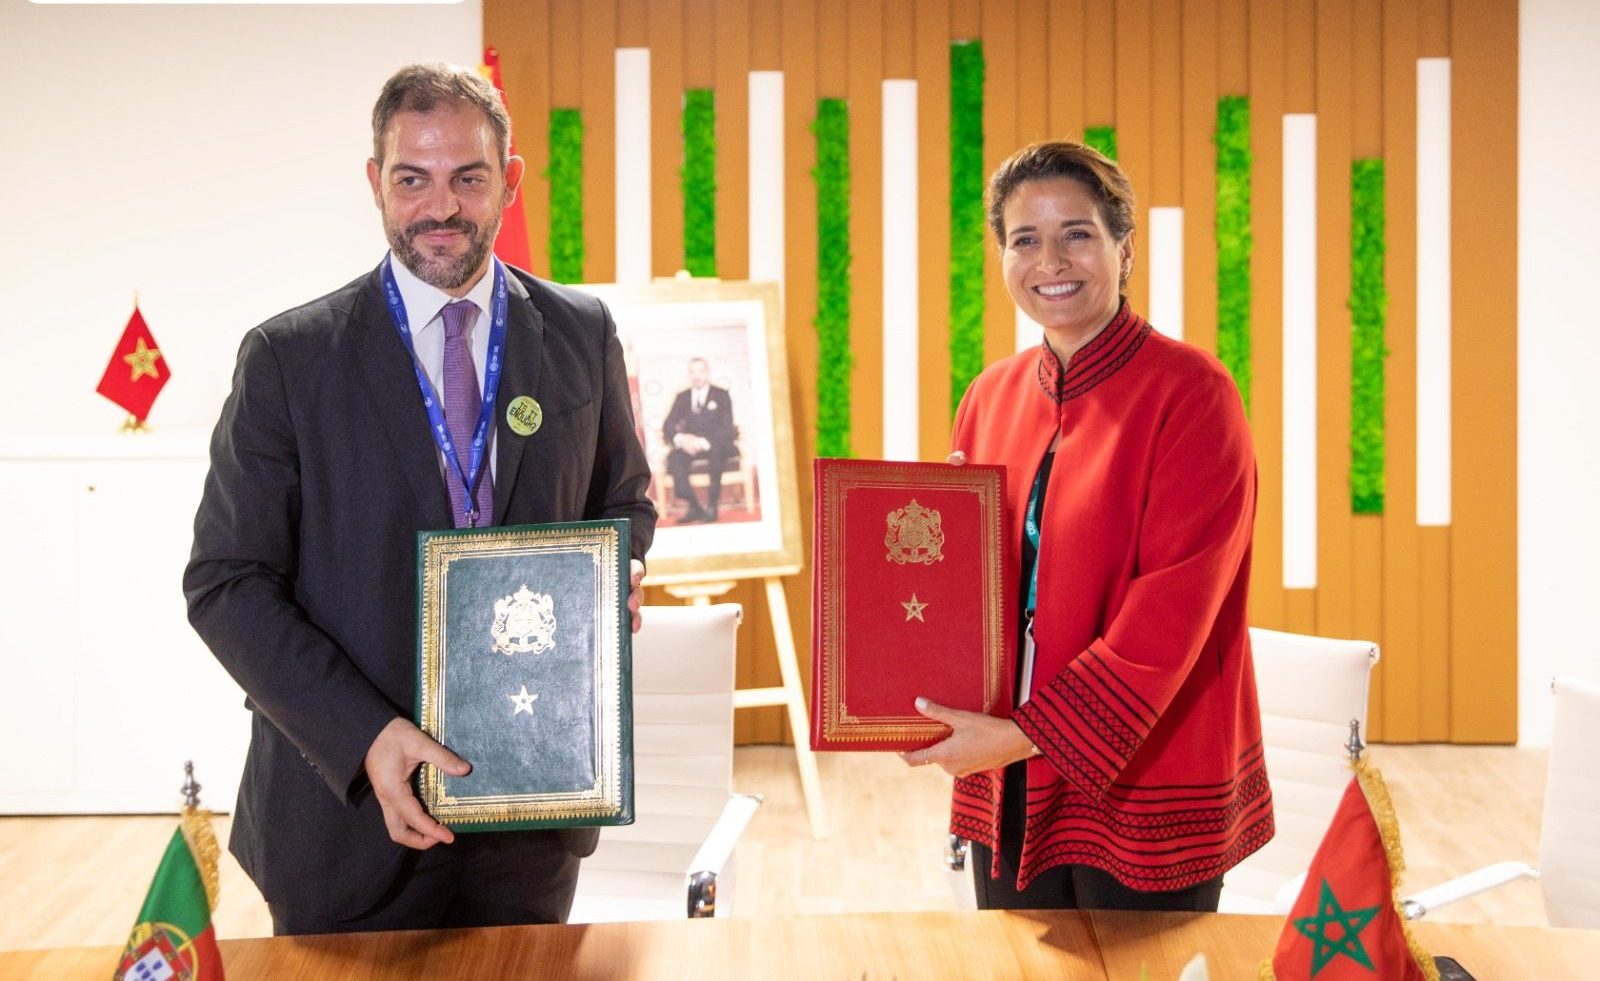 Moroccan Minister of Energy Transition and Sustainable Development, Leila Benali, and the Portuguese Minister of Environment and Climate Action, Duarte Cordeiro